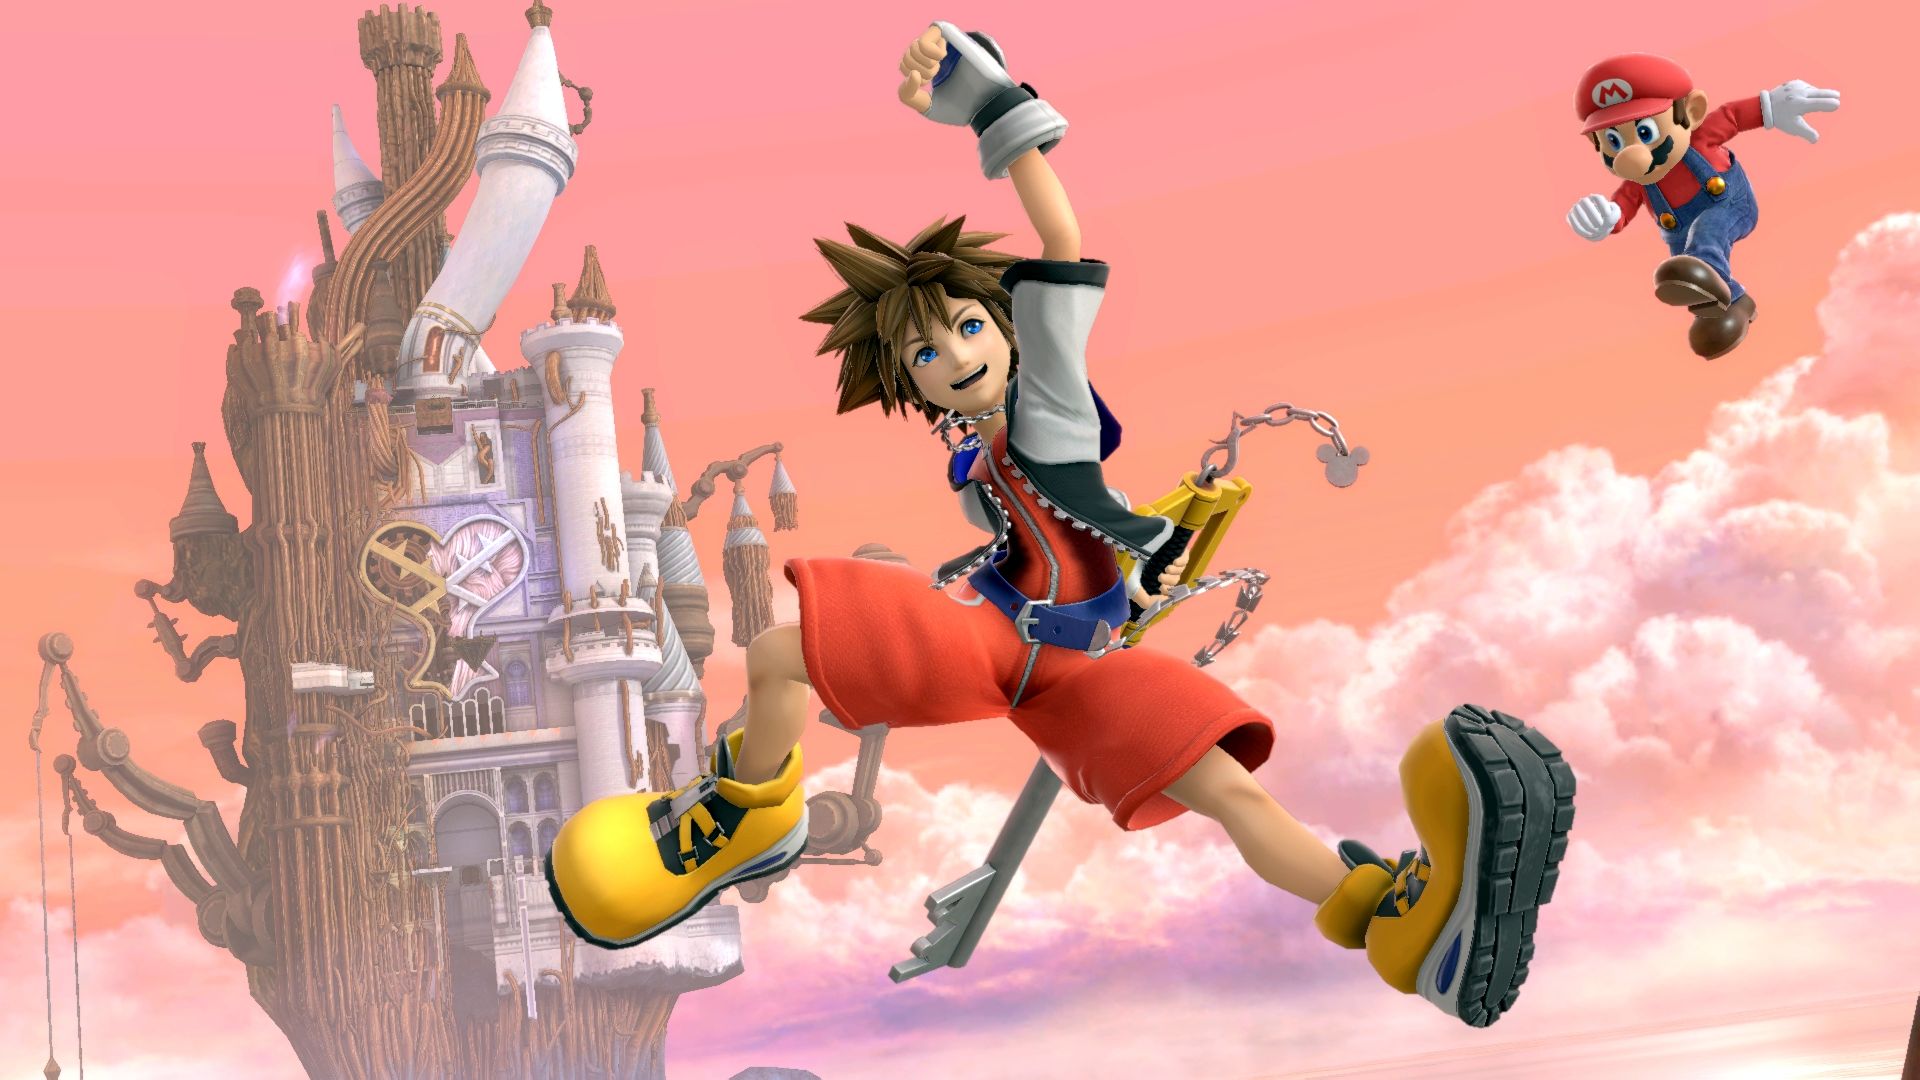 Image for The final Super Smash Bros. Ultimate character is Sora from Kingdom Hearts